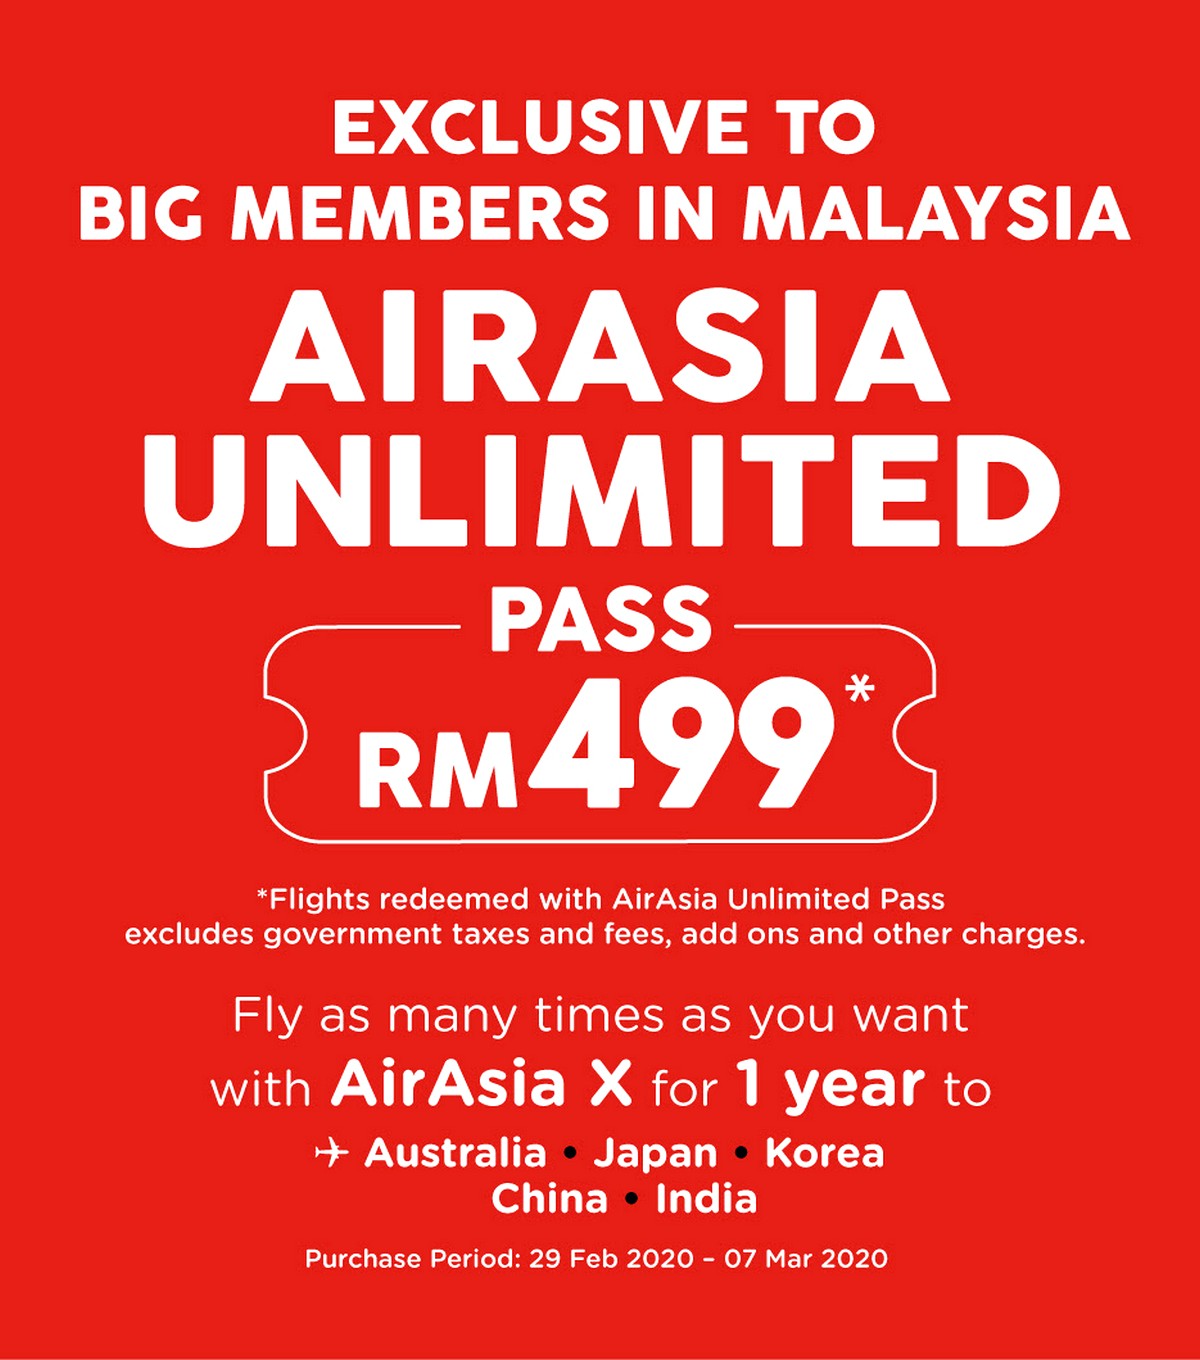 AirAsia-Amazing-RM499-Unlimited-Flights-to-5-countries-Australia-Japan-Korea-China-India-Unlimited-Annual-Pass-29-Feb-2020-1-day-only - LifeStyle 